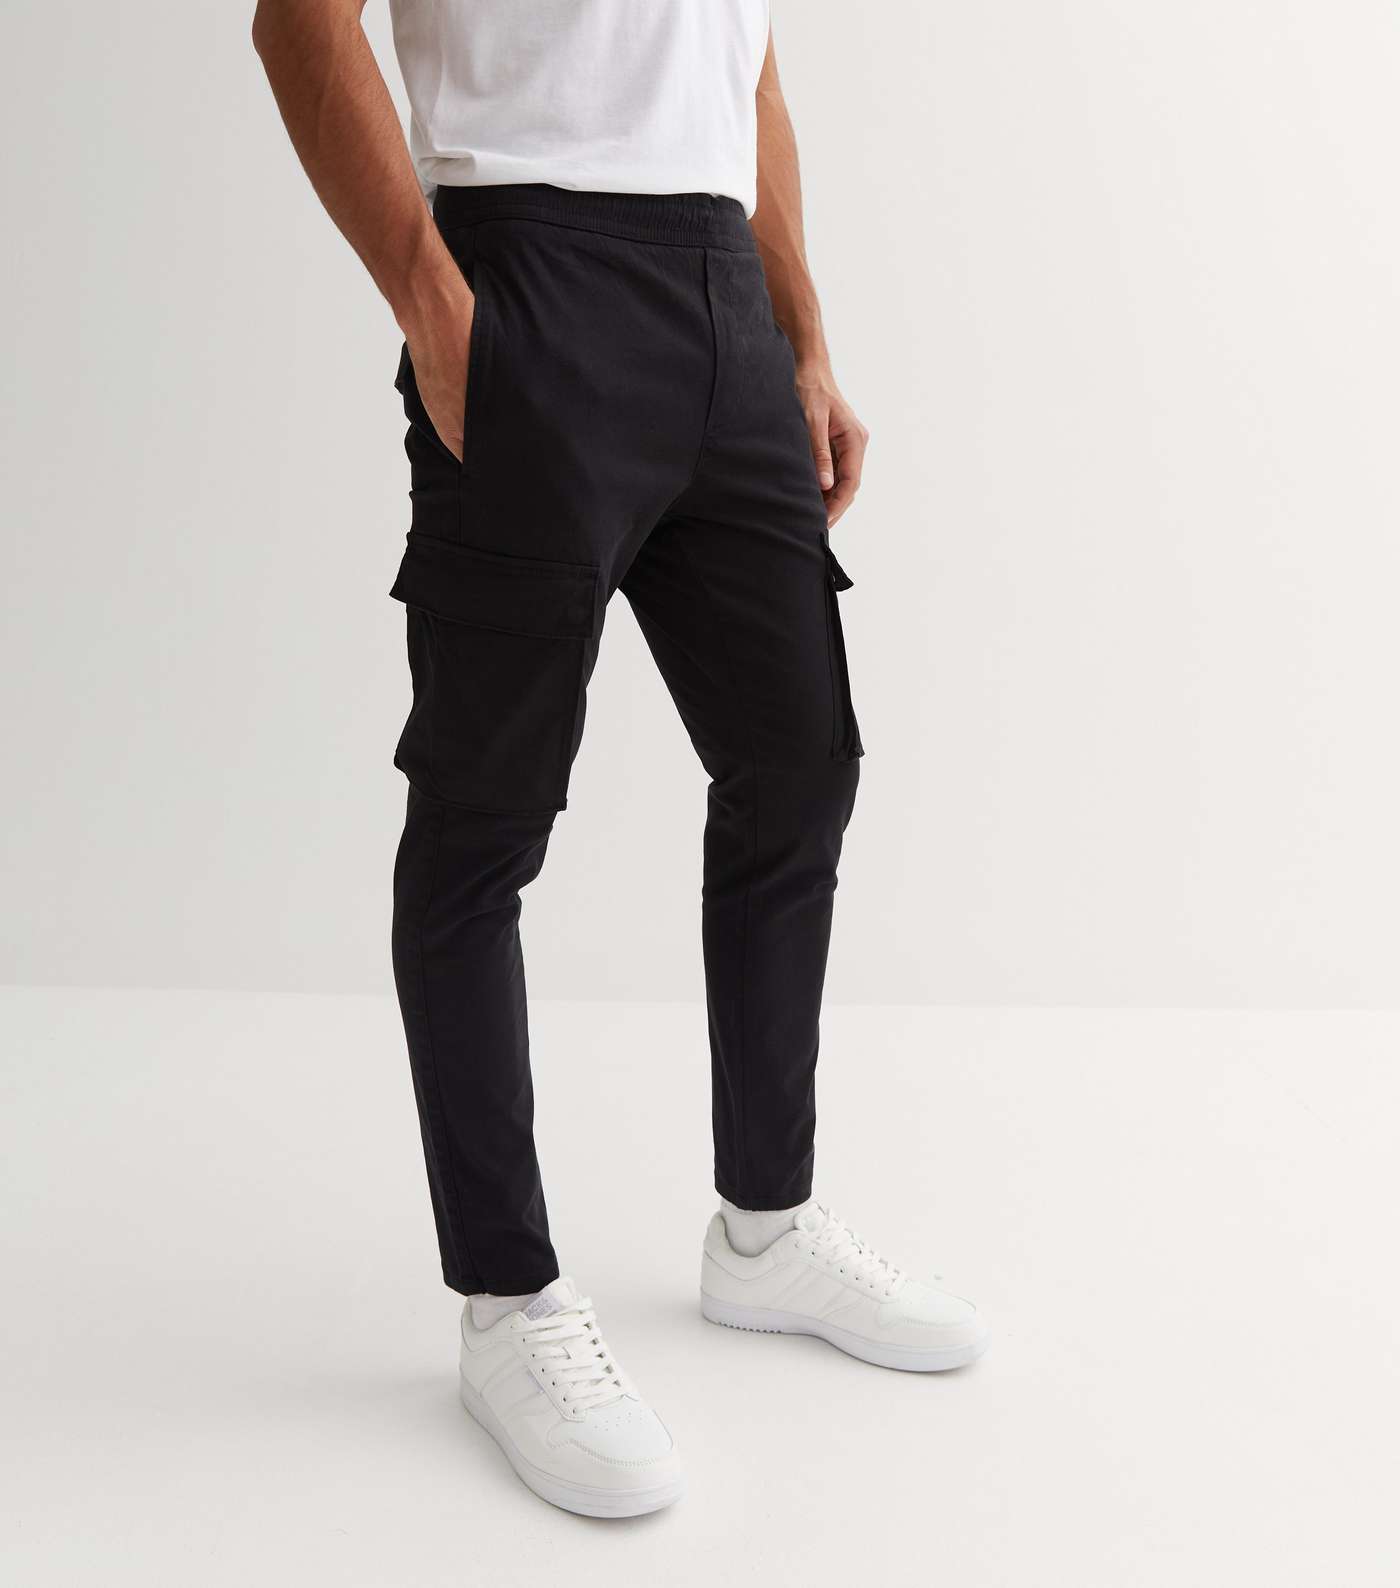 Only & Sons Black Slim Fit Cargo Trousers Image 2